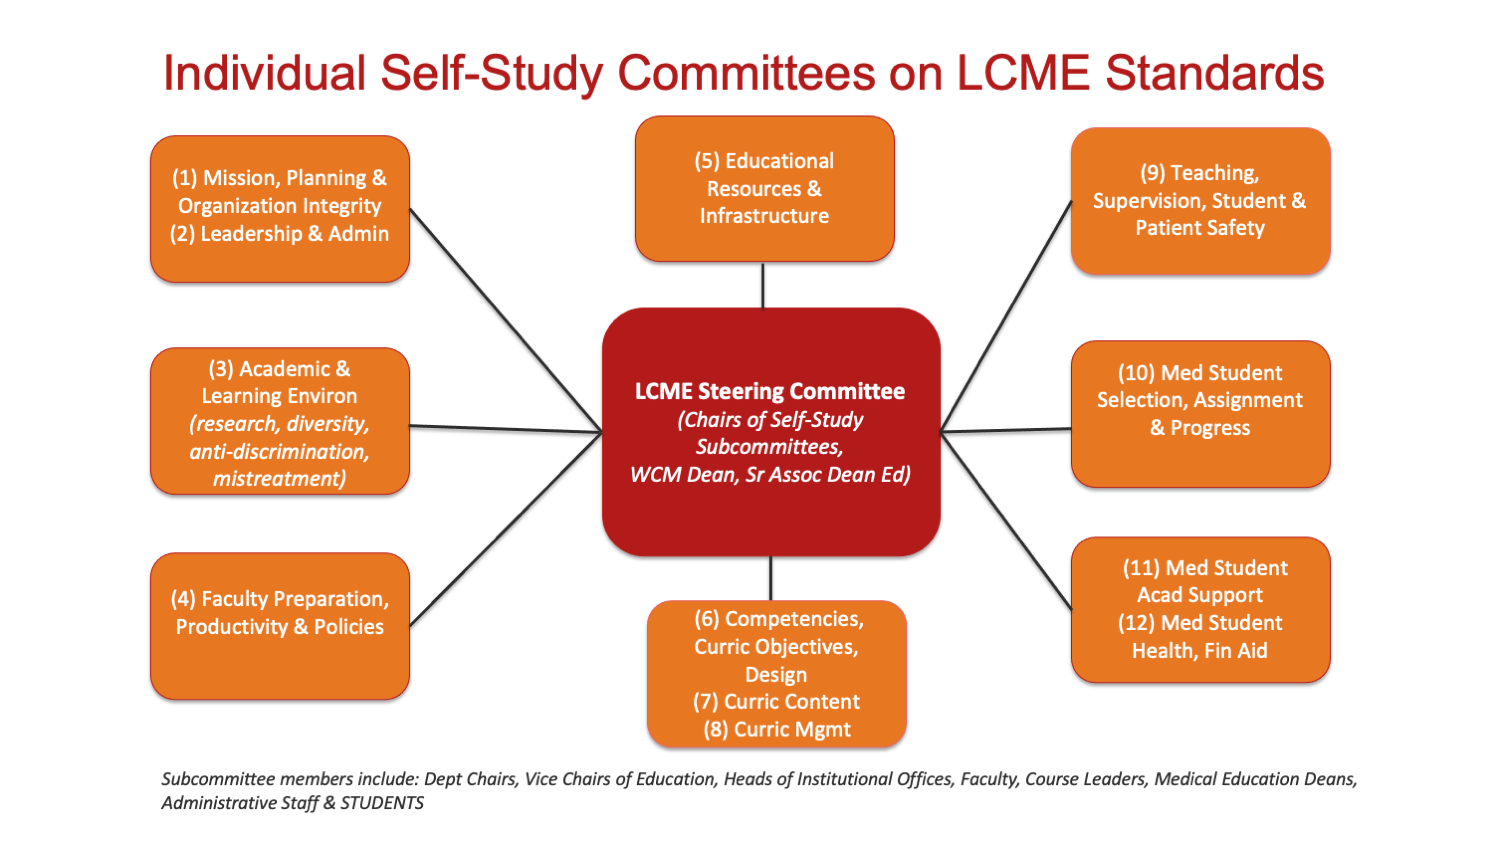 Individual Self-Study Committees on LCME Standards